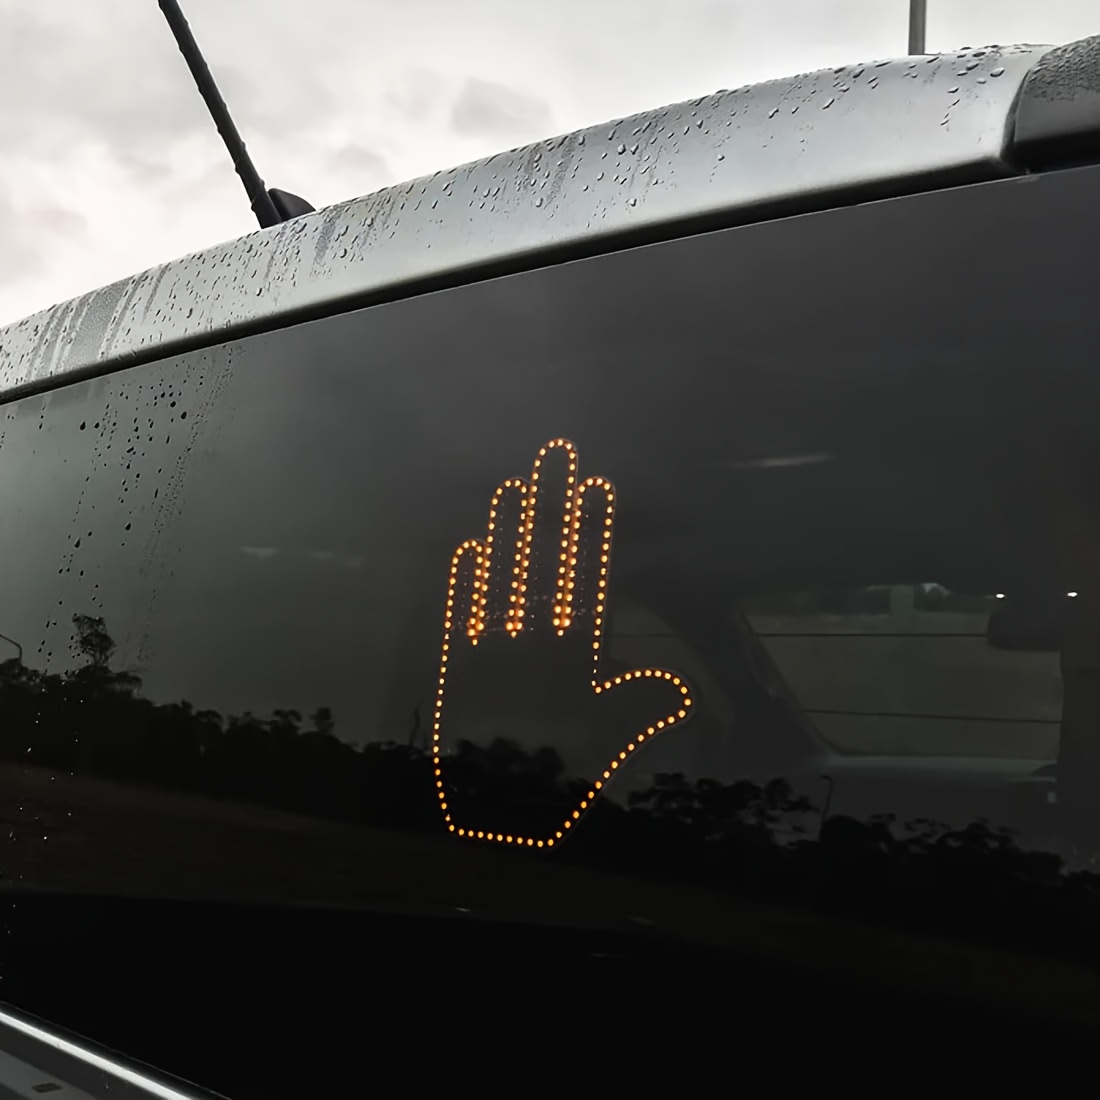 Funny Car Finger Light With Remote Hand Gesture Sign Light Glow Panel Auto  Signal Lamp Middle Gesture Hand Lamp For Rear Window - AliExpress